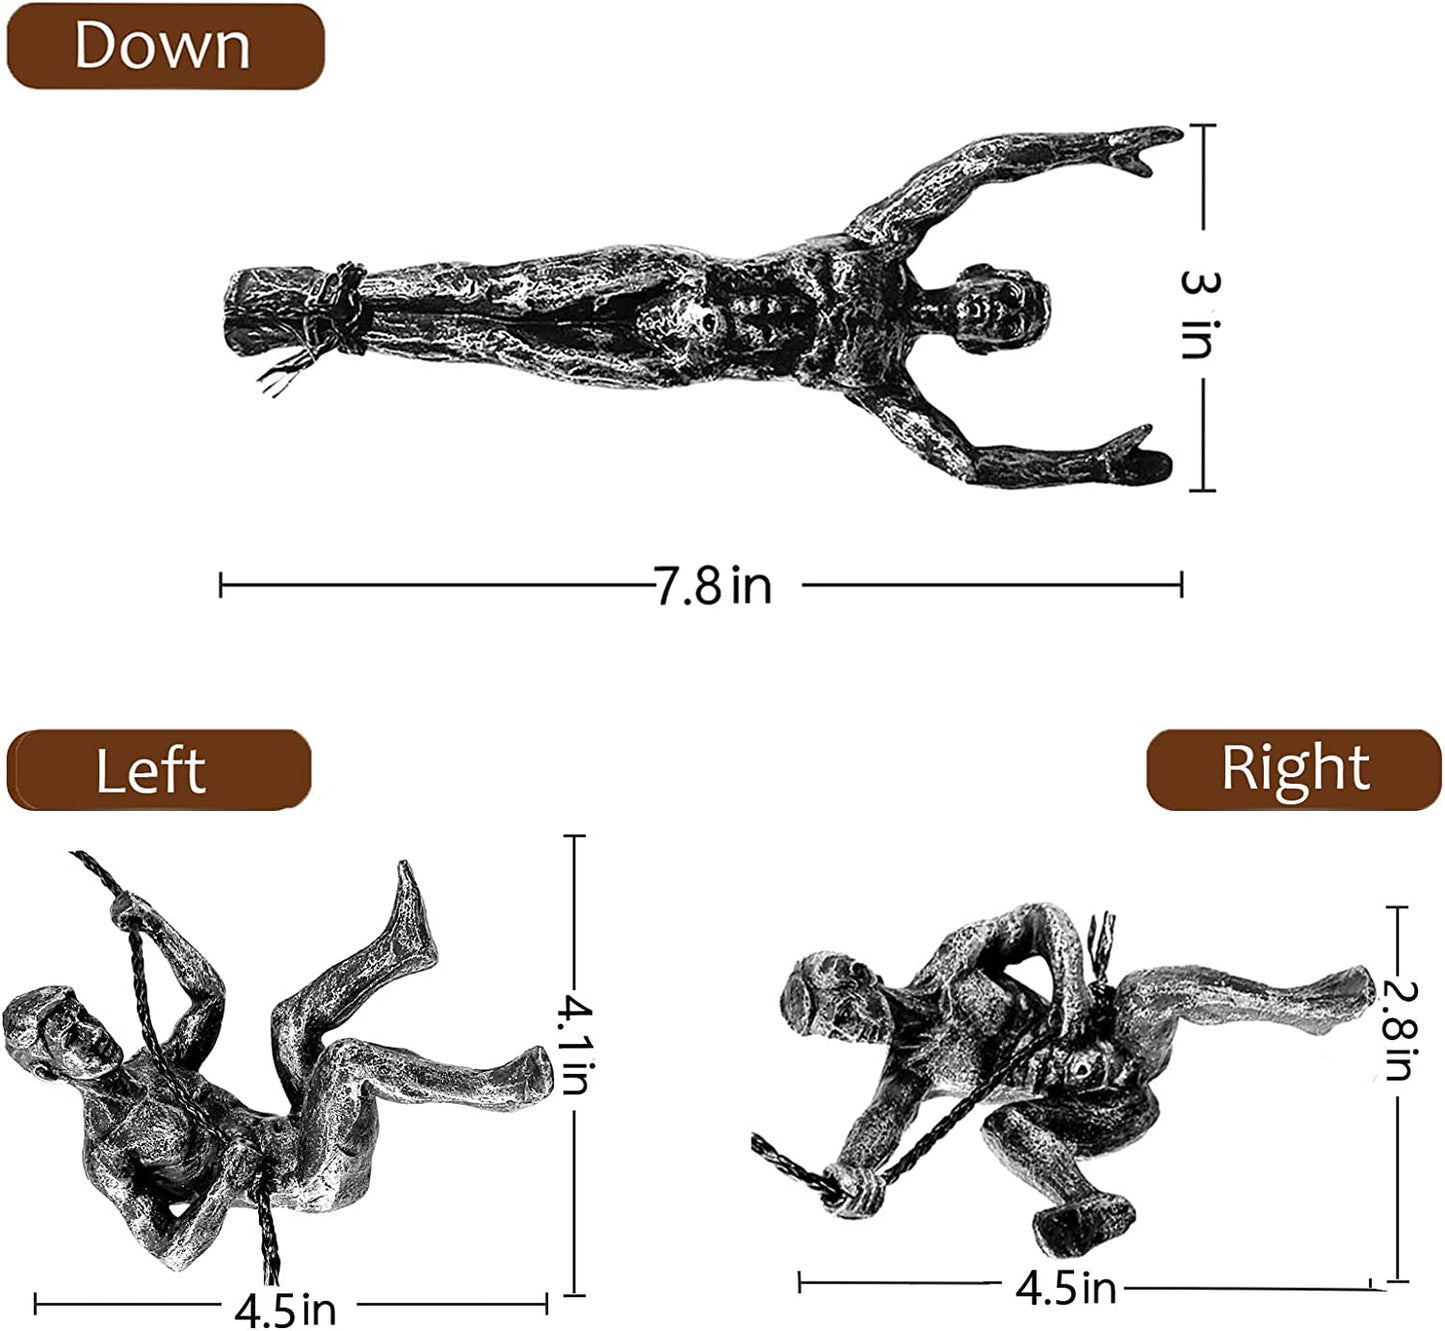 Set of 3 Climbing Men 7.8" down Climbing Man Wall Art Decor Rock Climbing Gifts Modern 3D for Men'S Unique Sports & Outdoors Sculpture for Bedroom Home Office Company- and 4.5” Left/Right